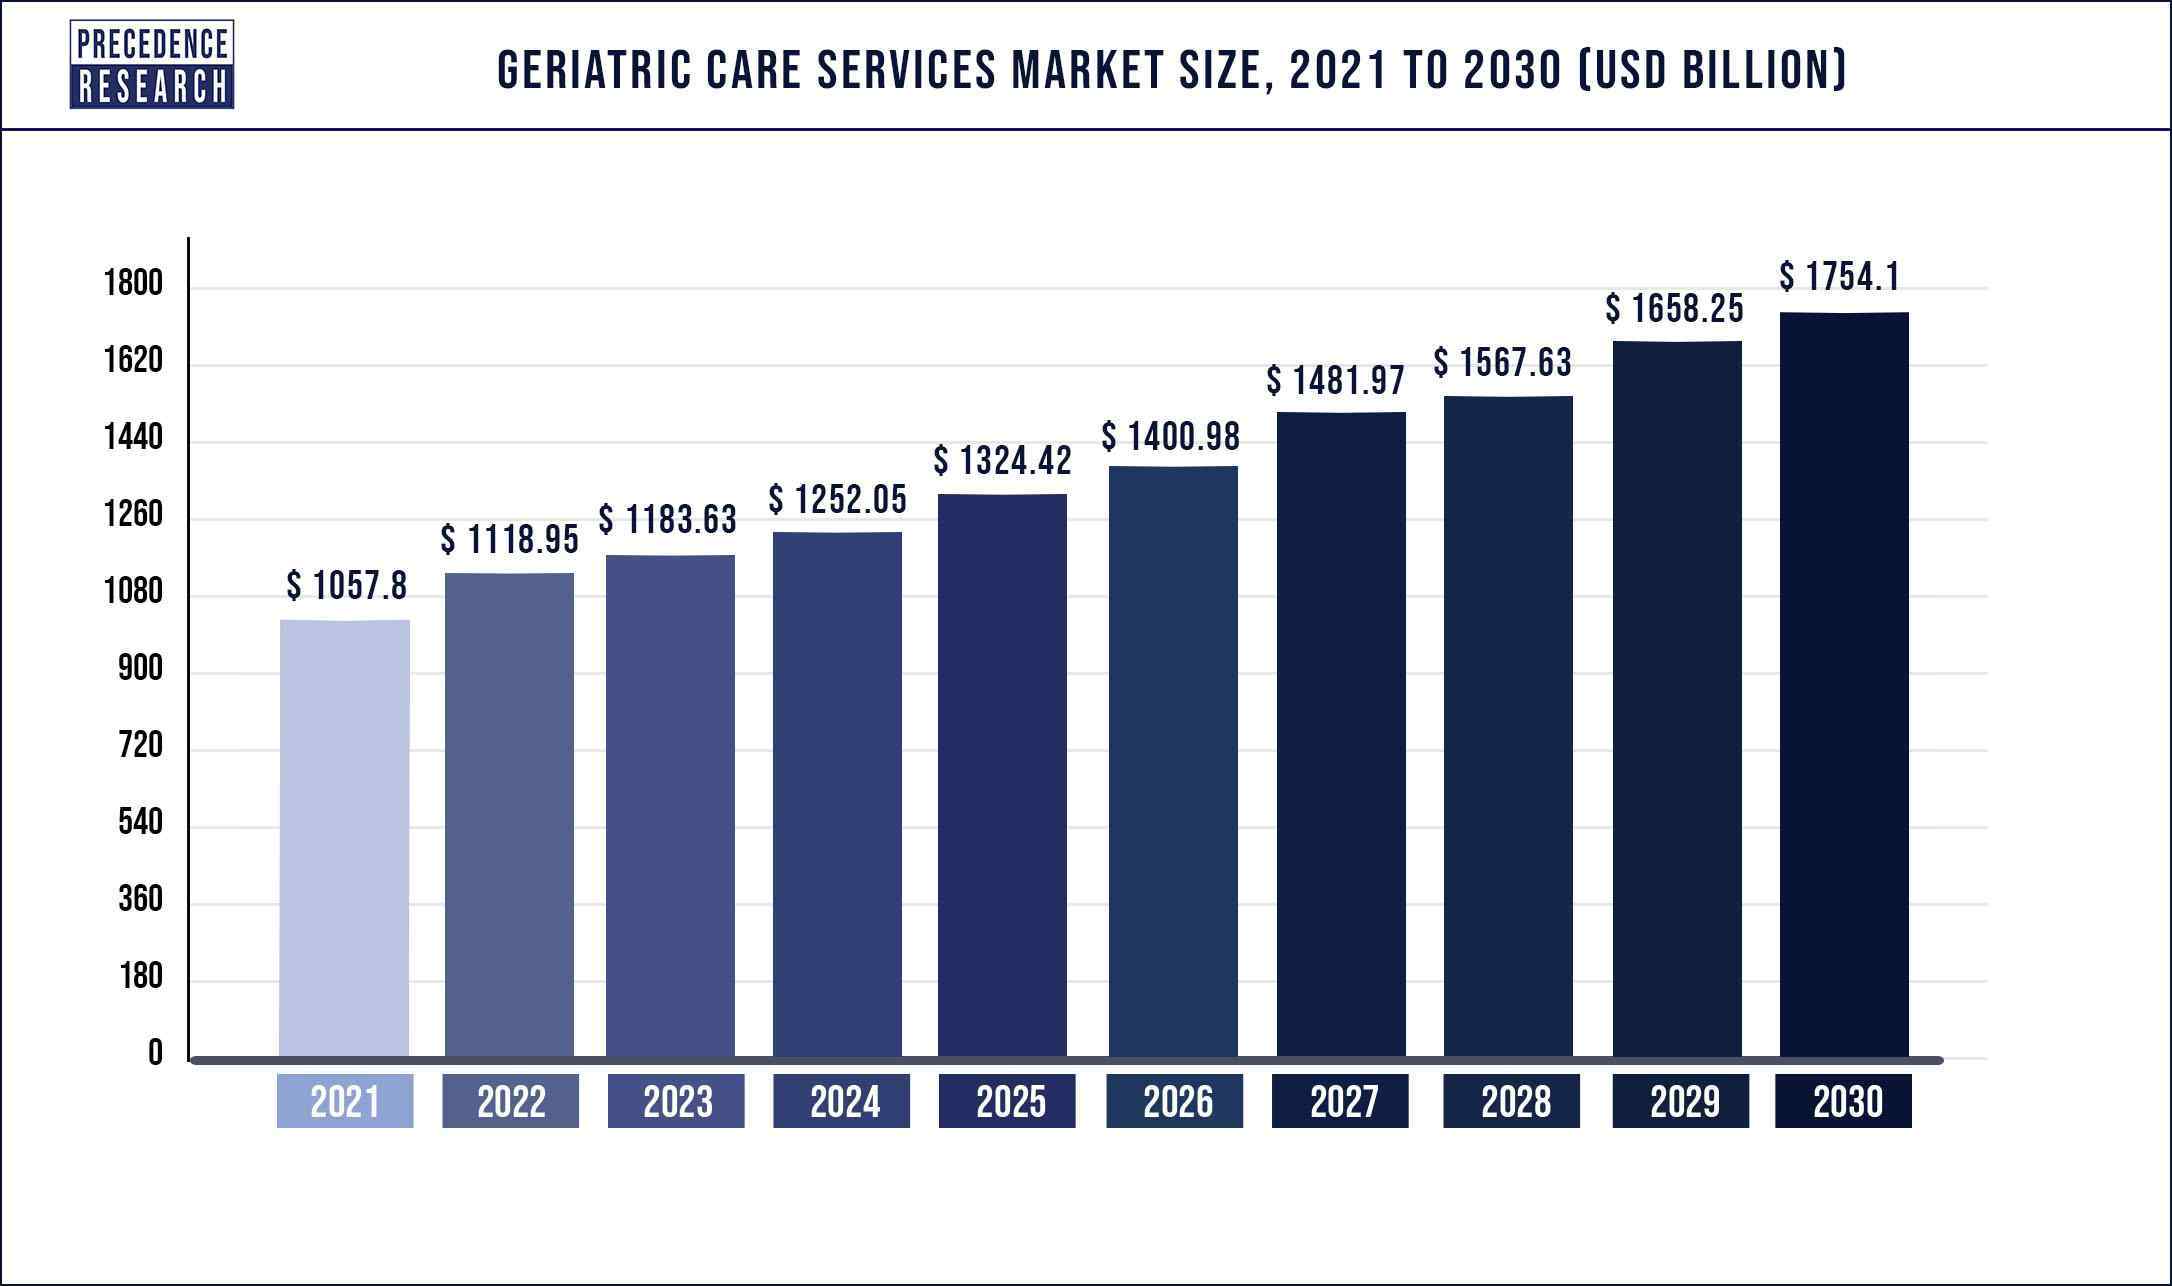 Geriatric Care Services Market Size 2021 to 2030